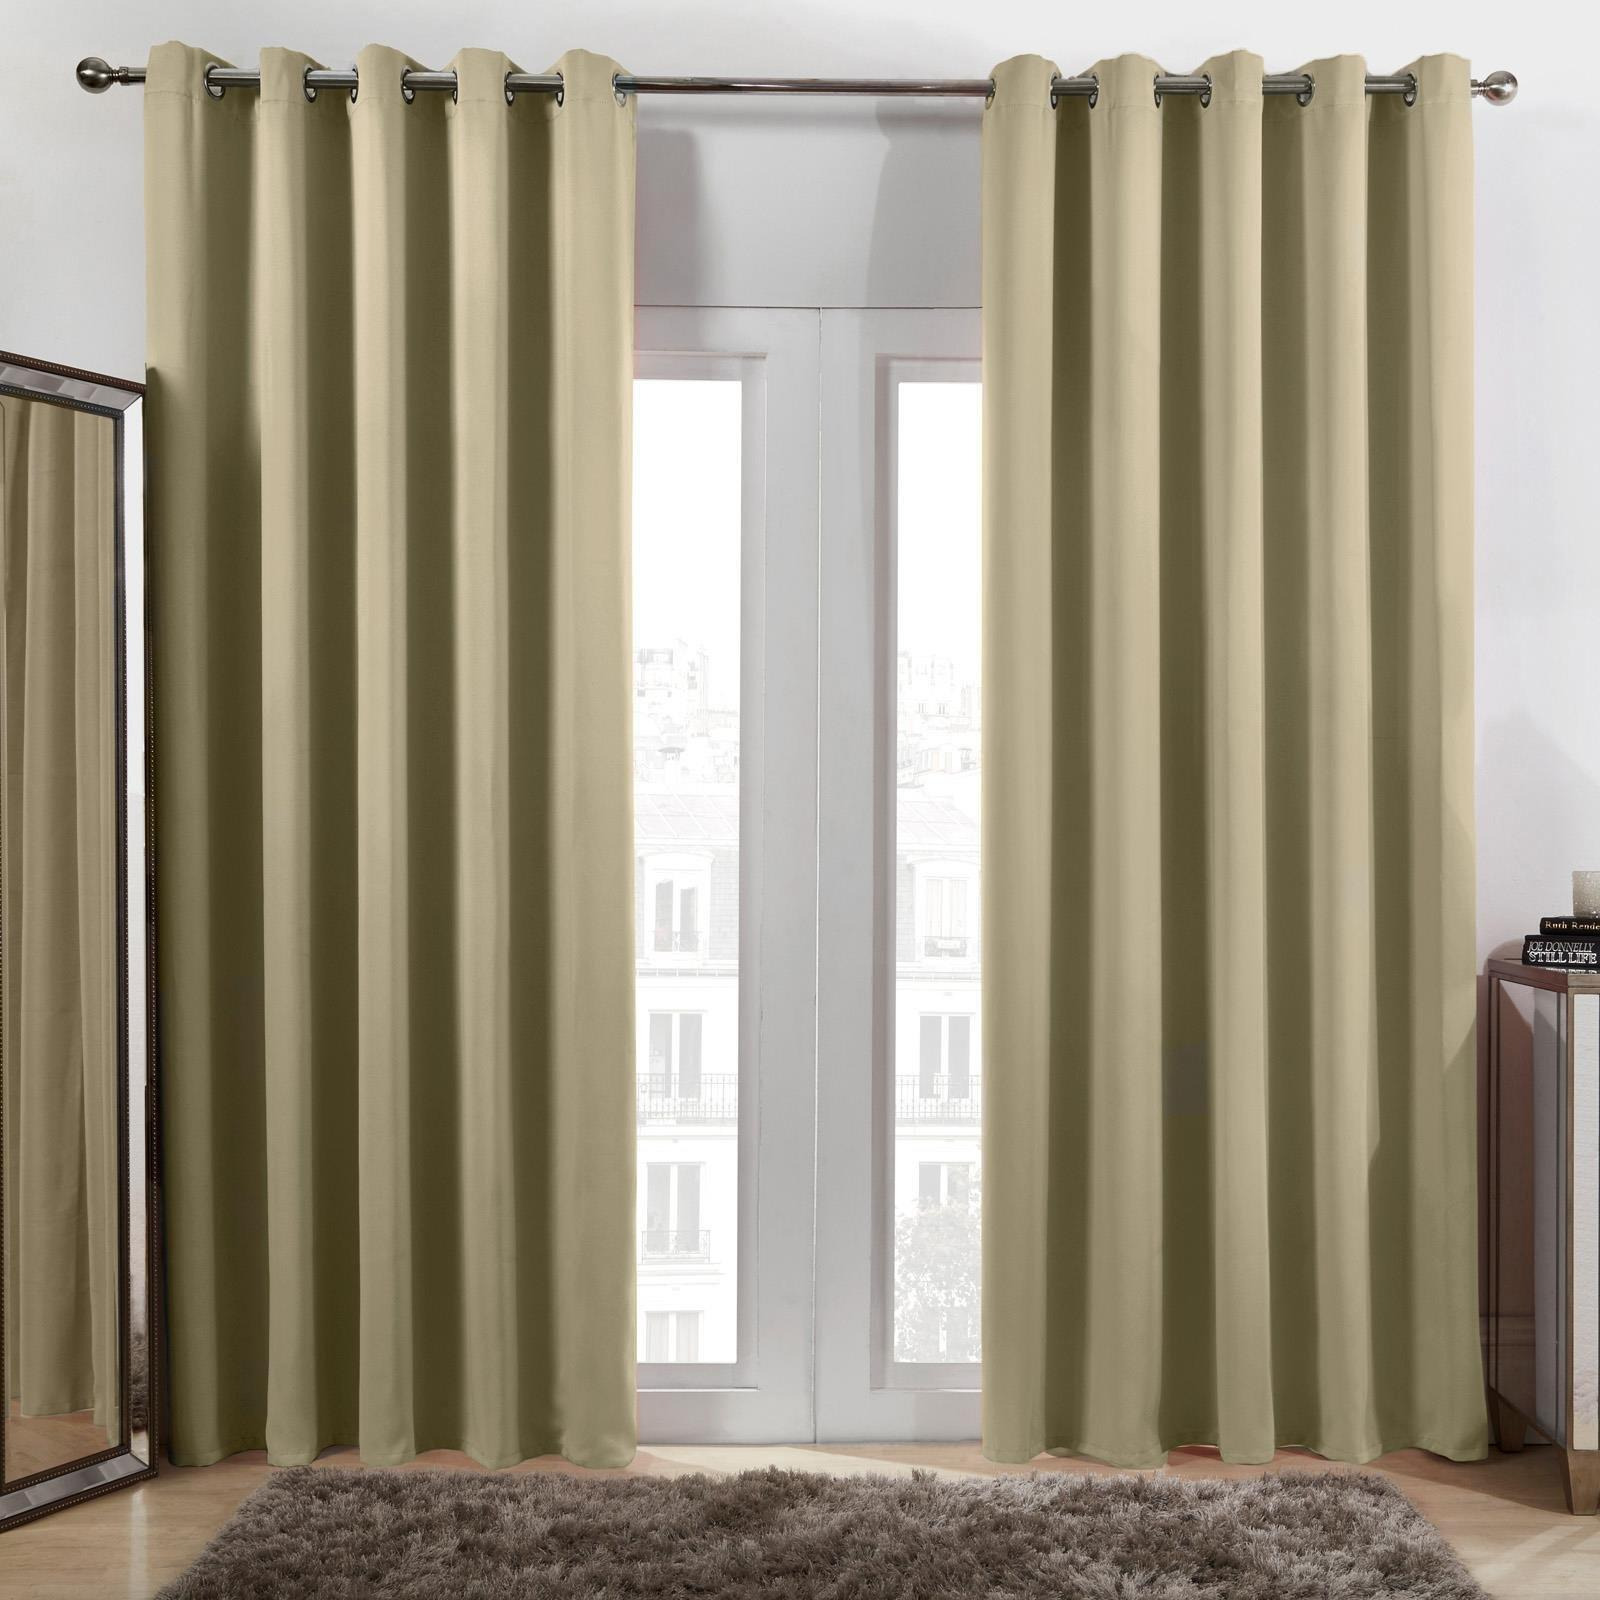 Pair of Thermal Ready Made Eyelet Blackout Curtains - image 1